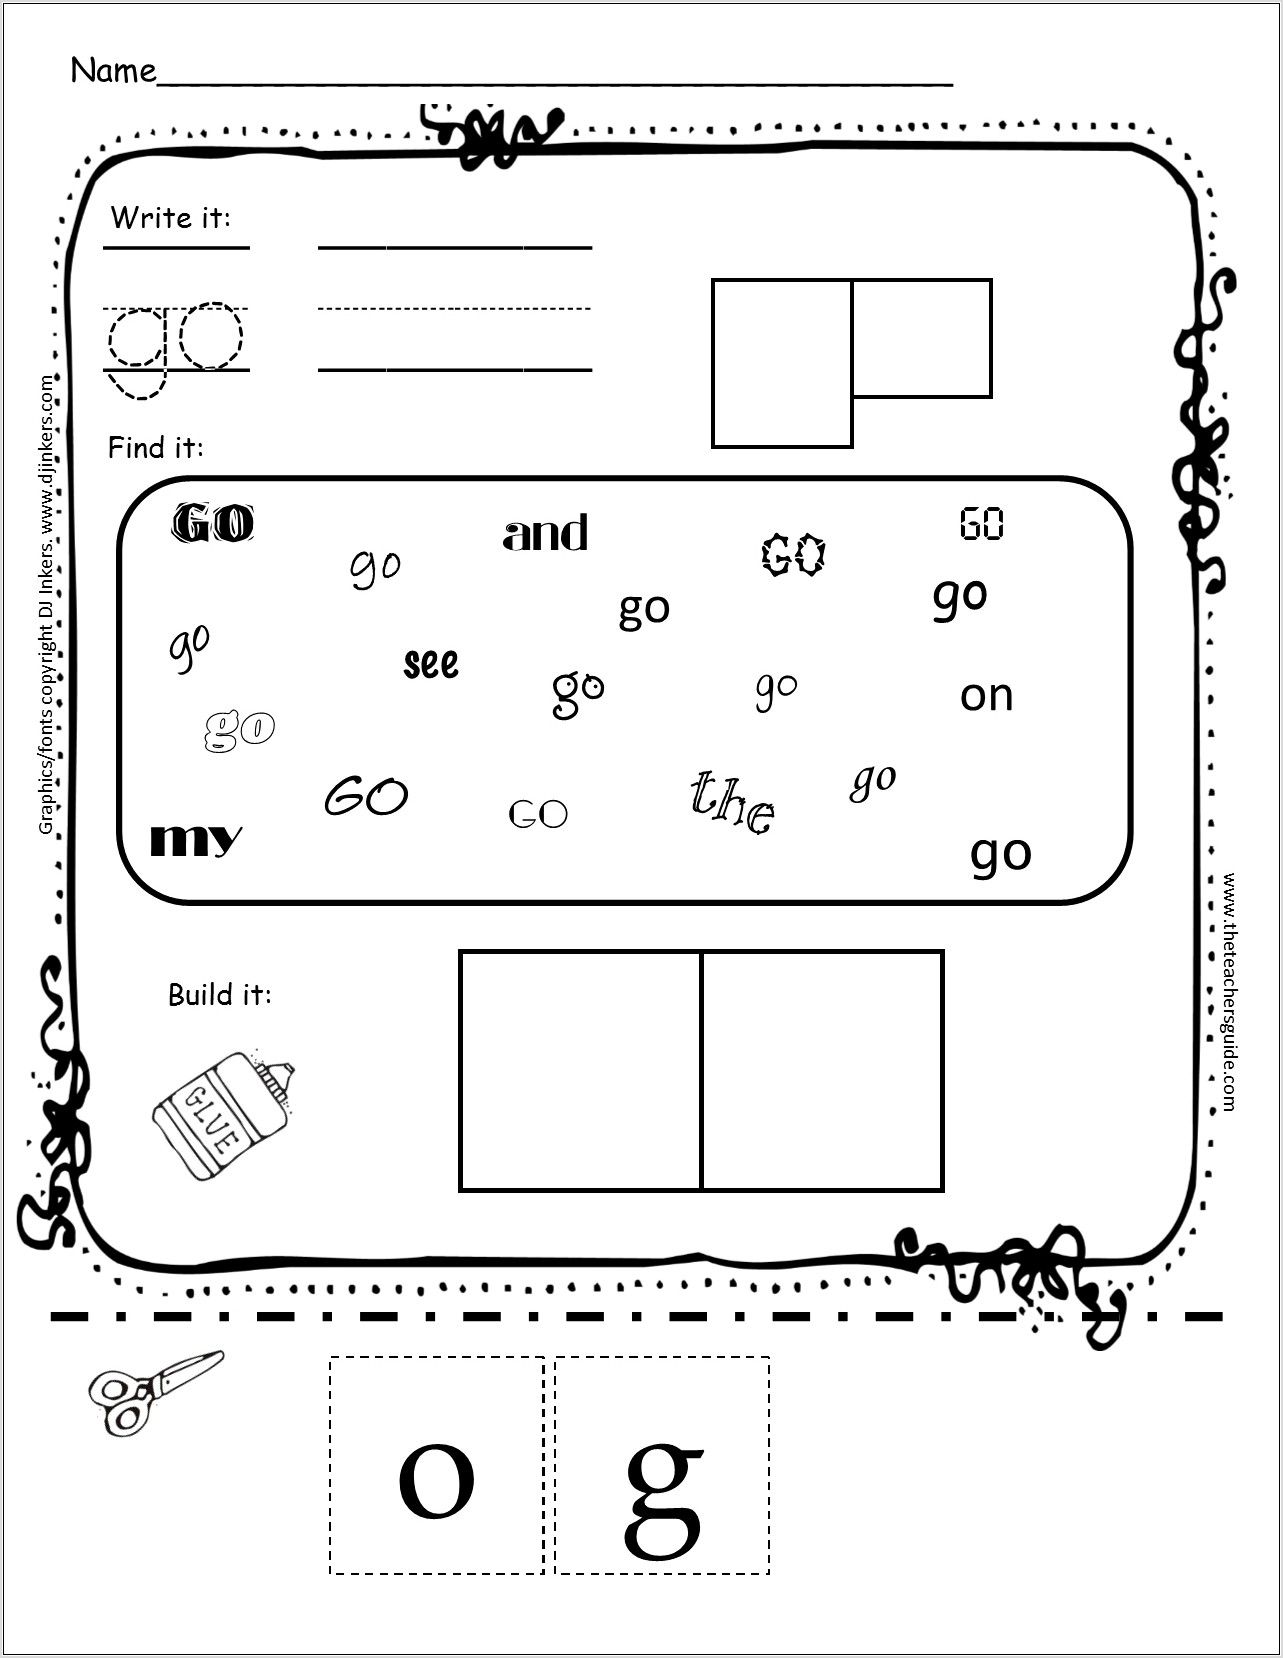 Worksheet For The Sight Word Go